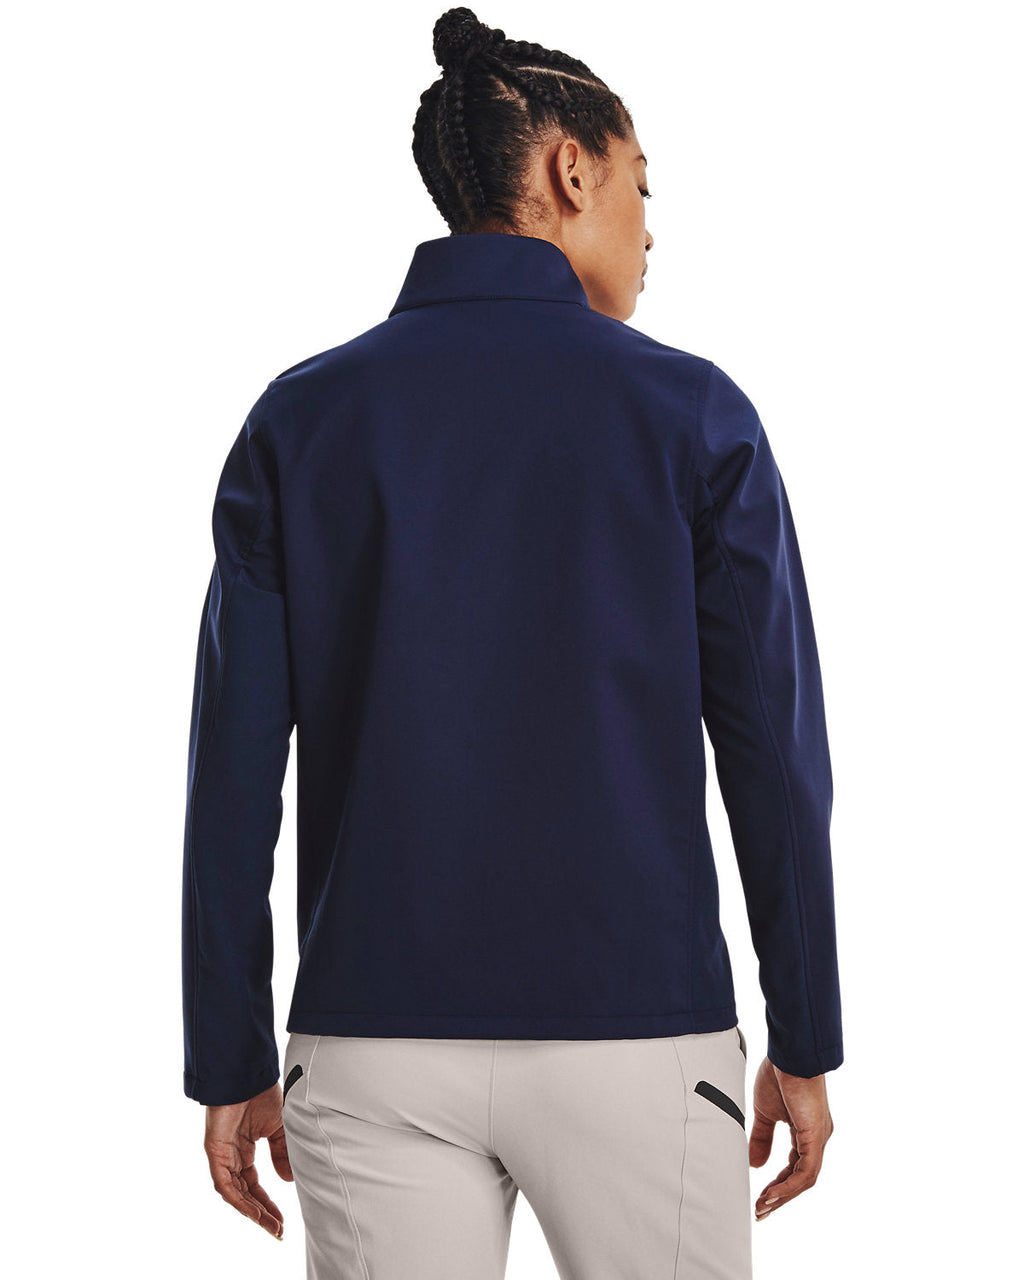 Branded Under Armour Men's ColdGear Infrared Shield 2.0 Jacket 1371586 Mid  Navy White